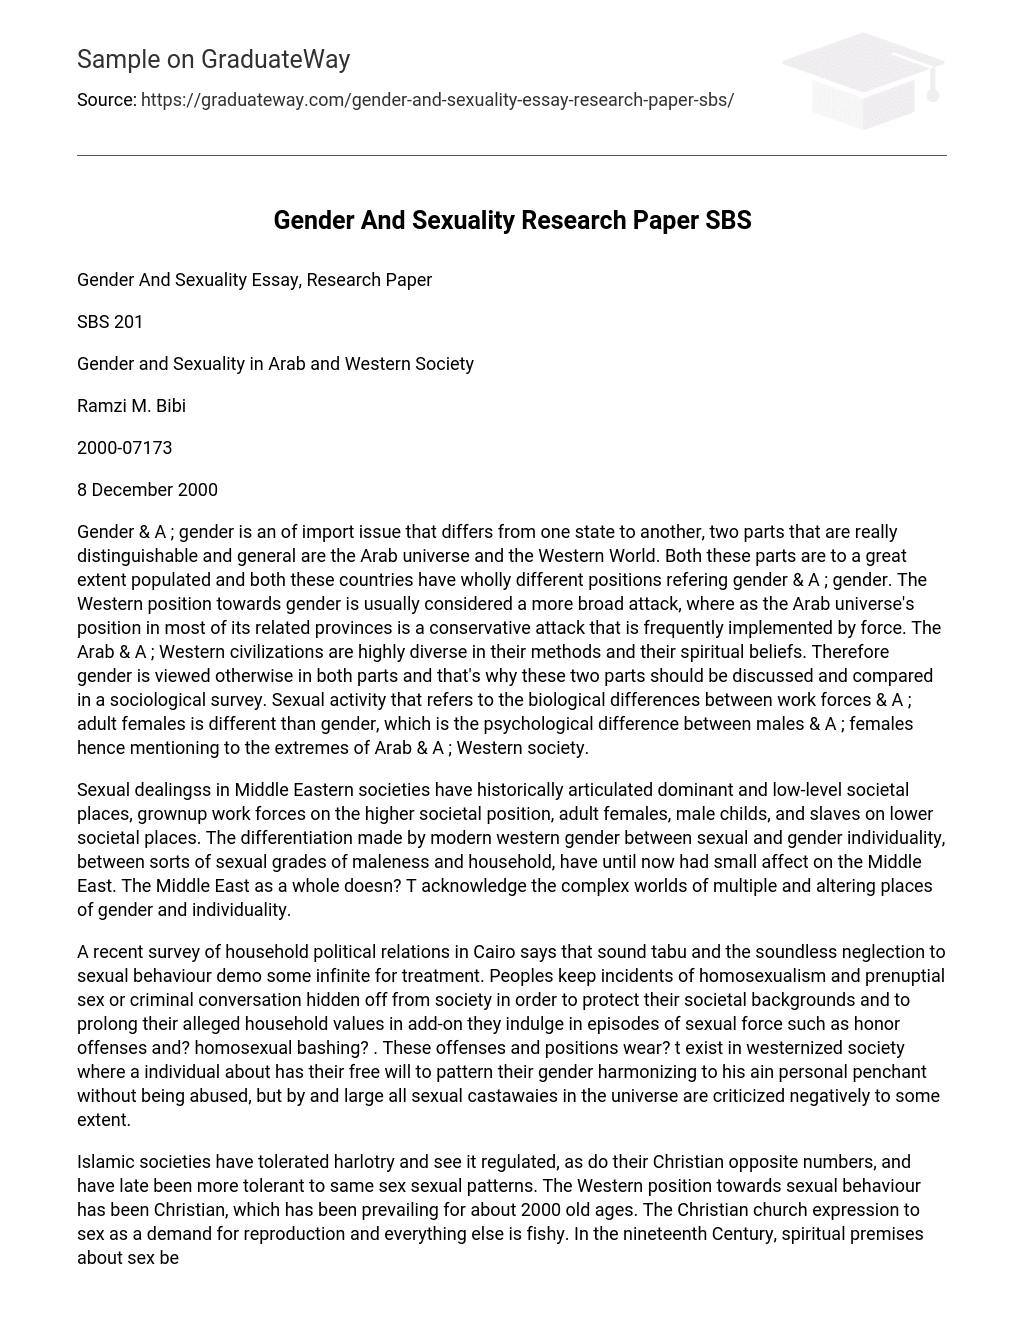 Gender And Sexuality Research Paper SBS